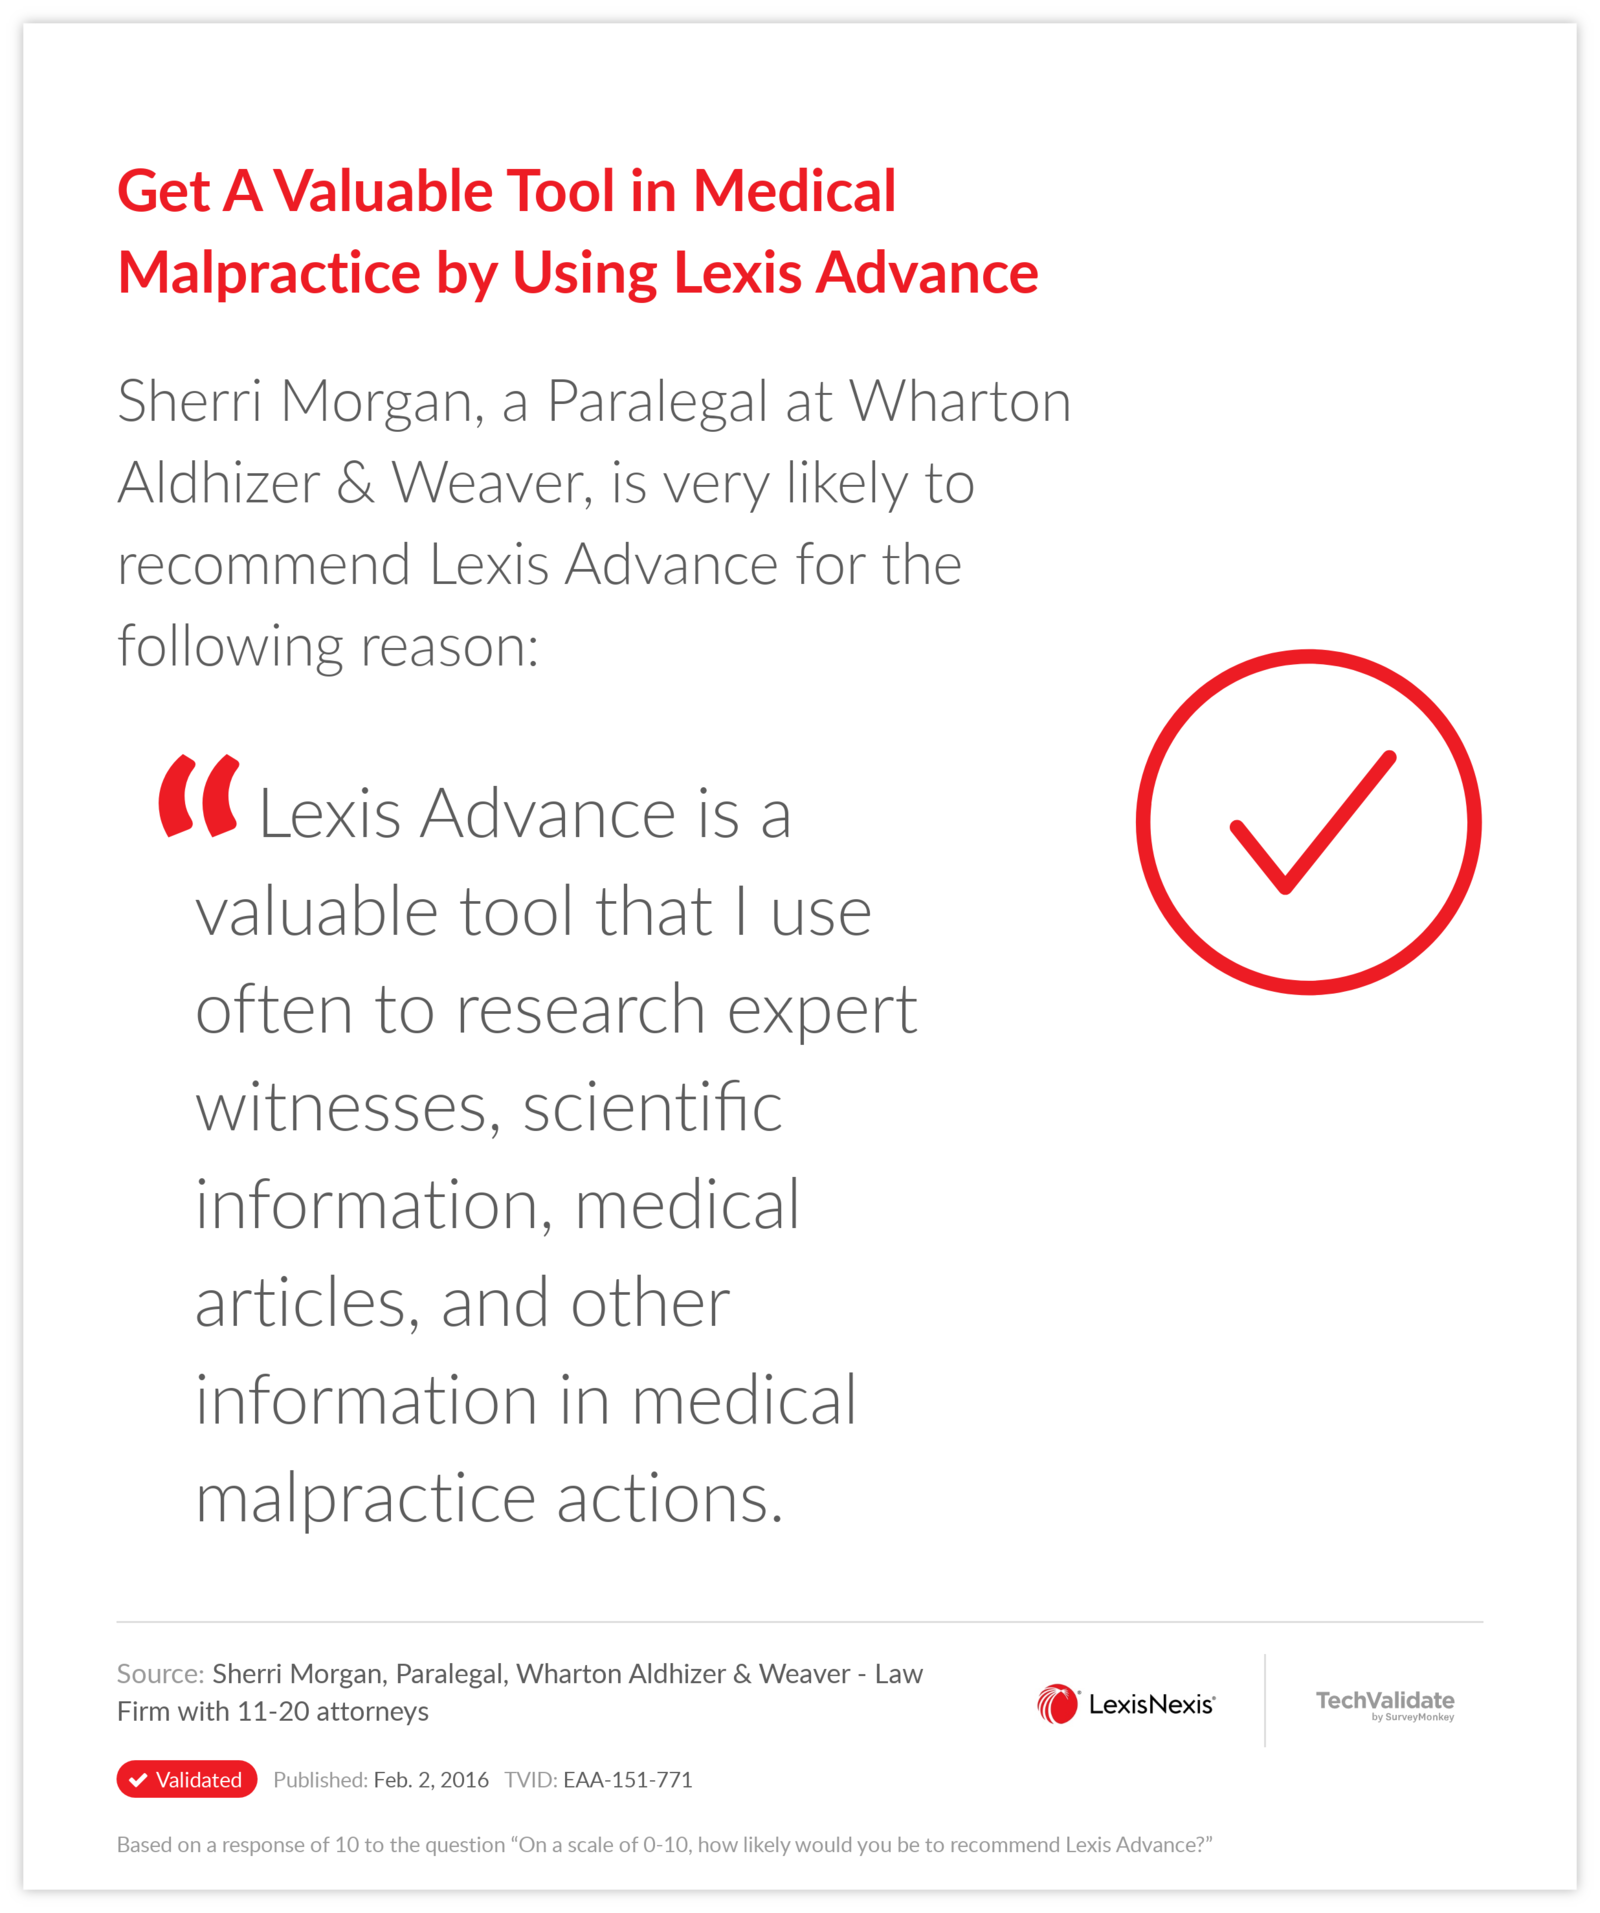 Get A Valuable Tool in Medical Malpractice by Using Lexis Advance